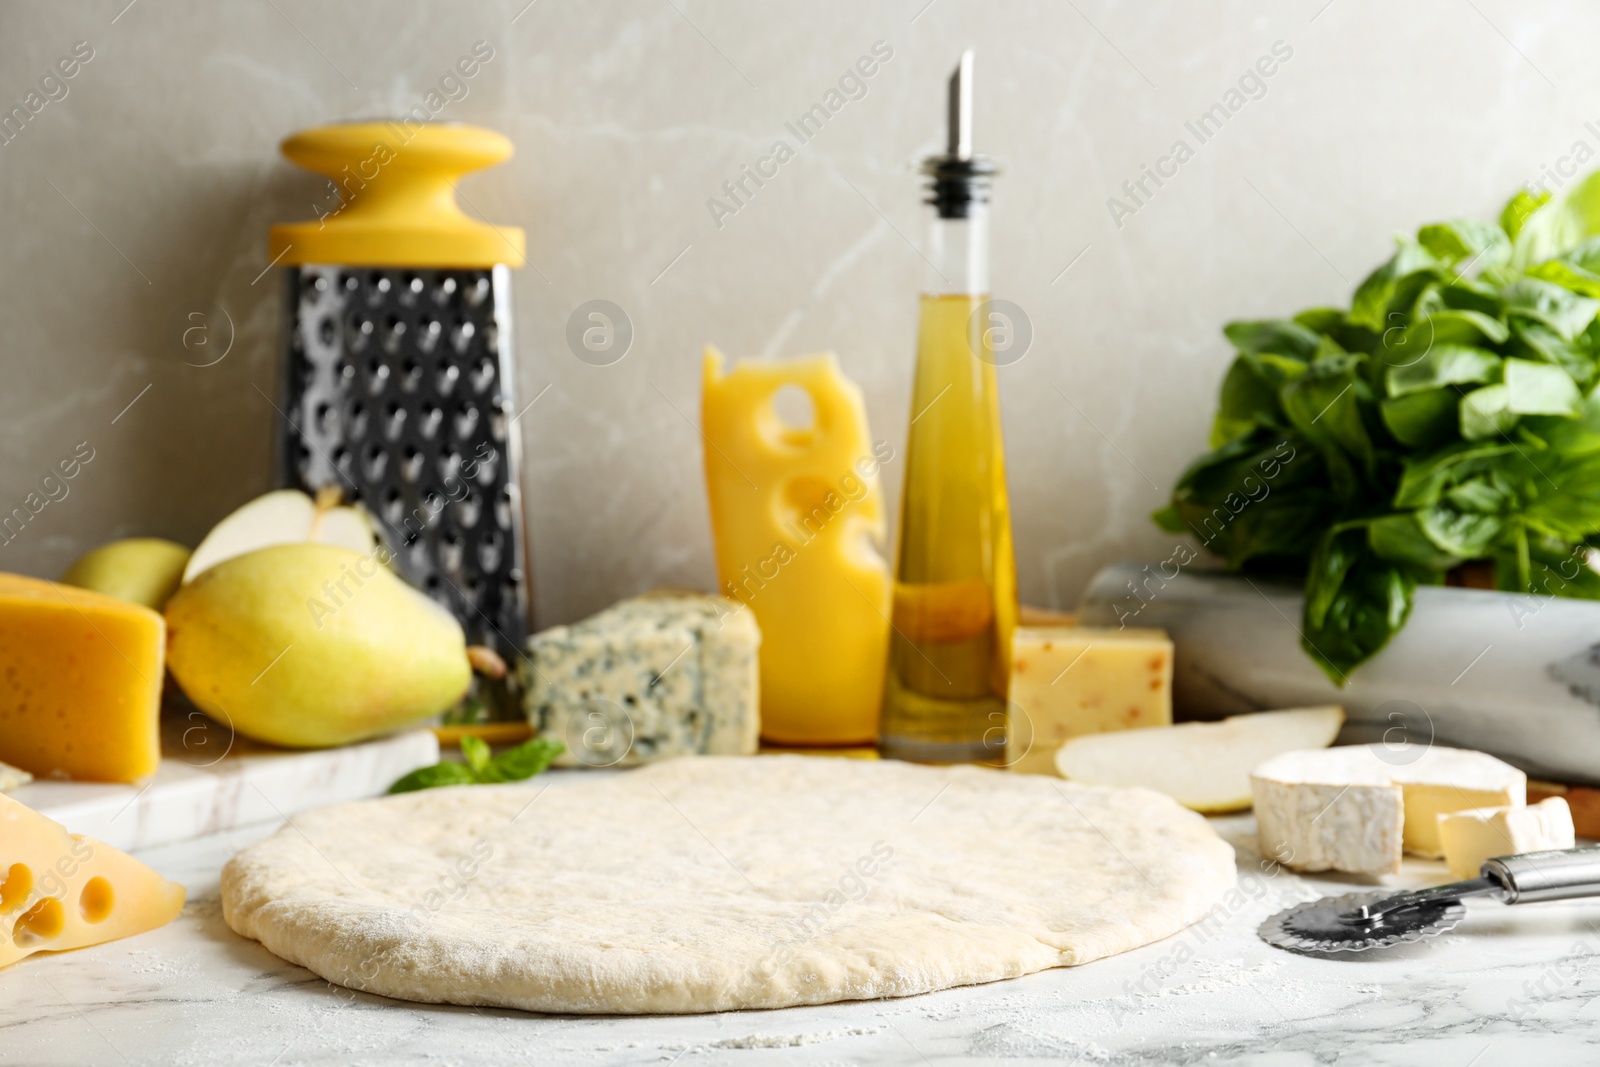 Photo of Pizza crust and fresh ingredients on marble table